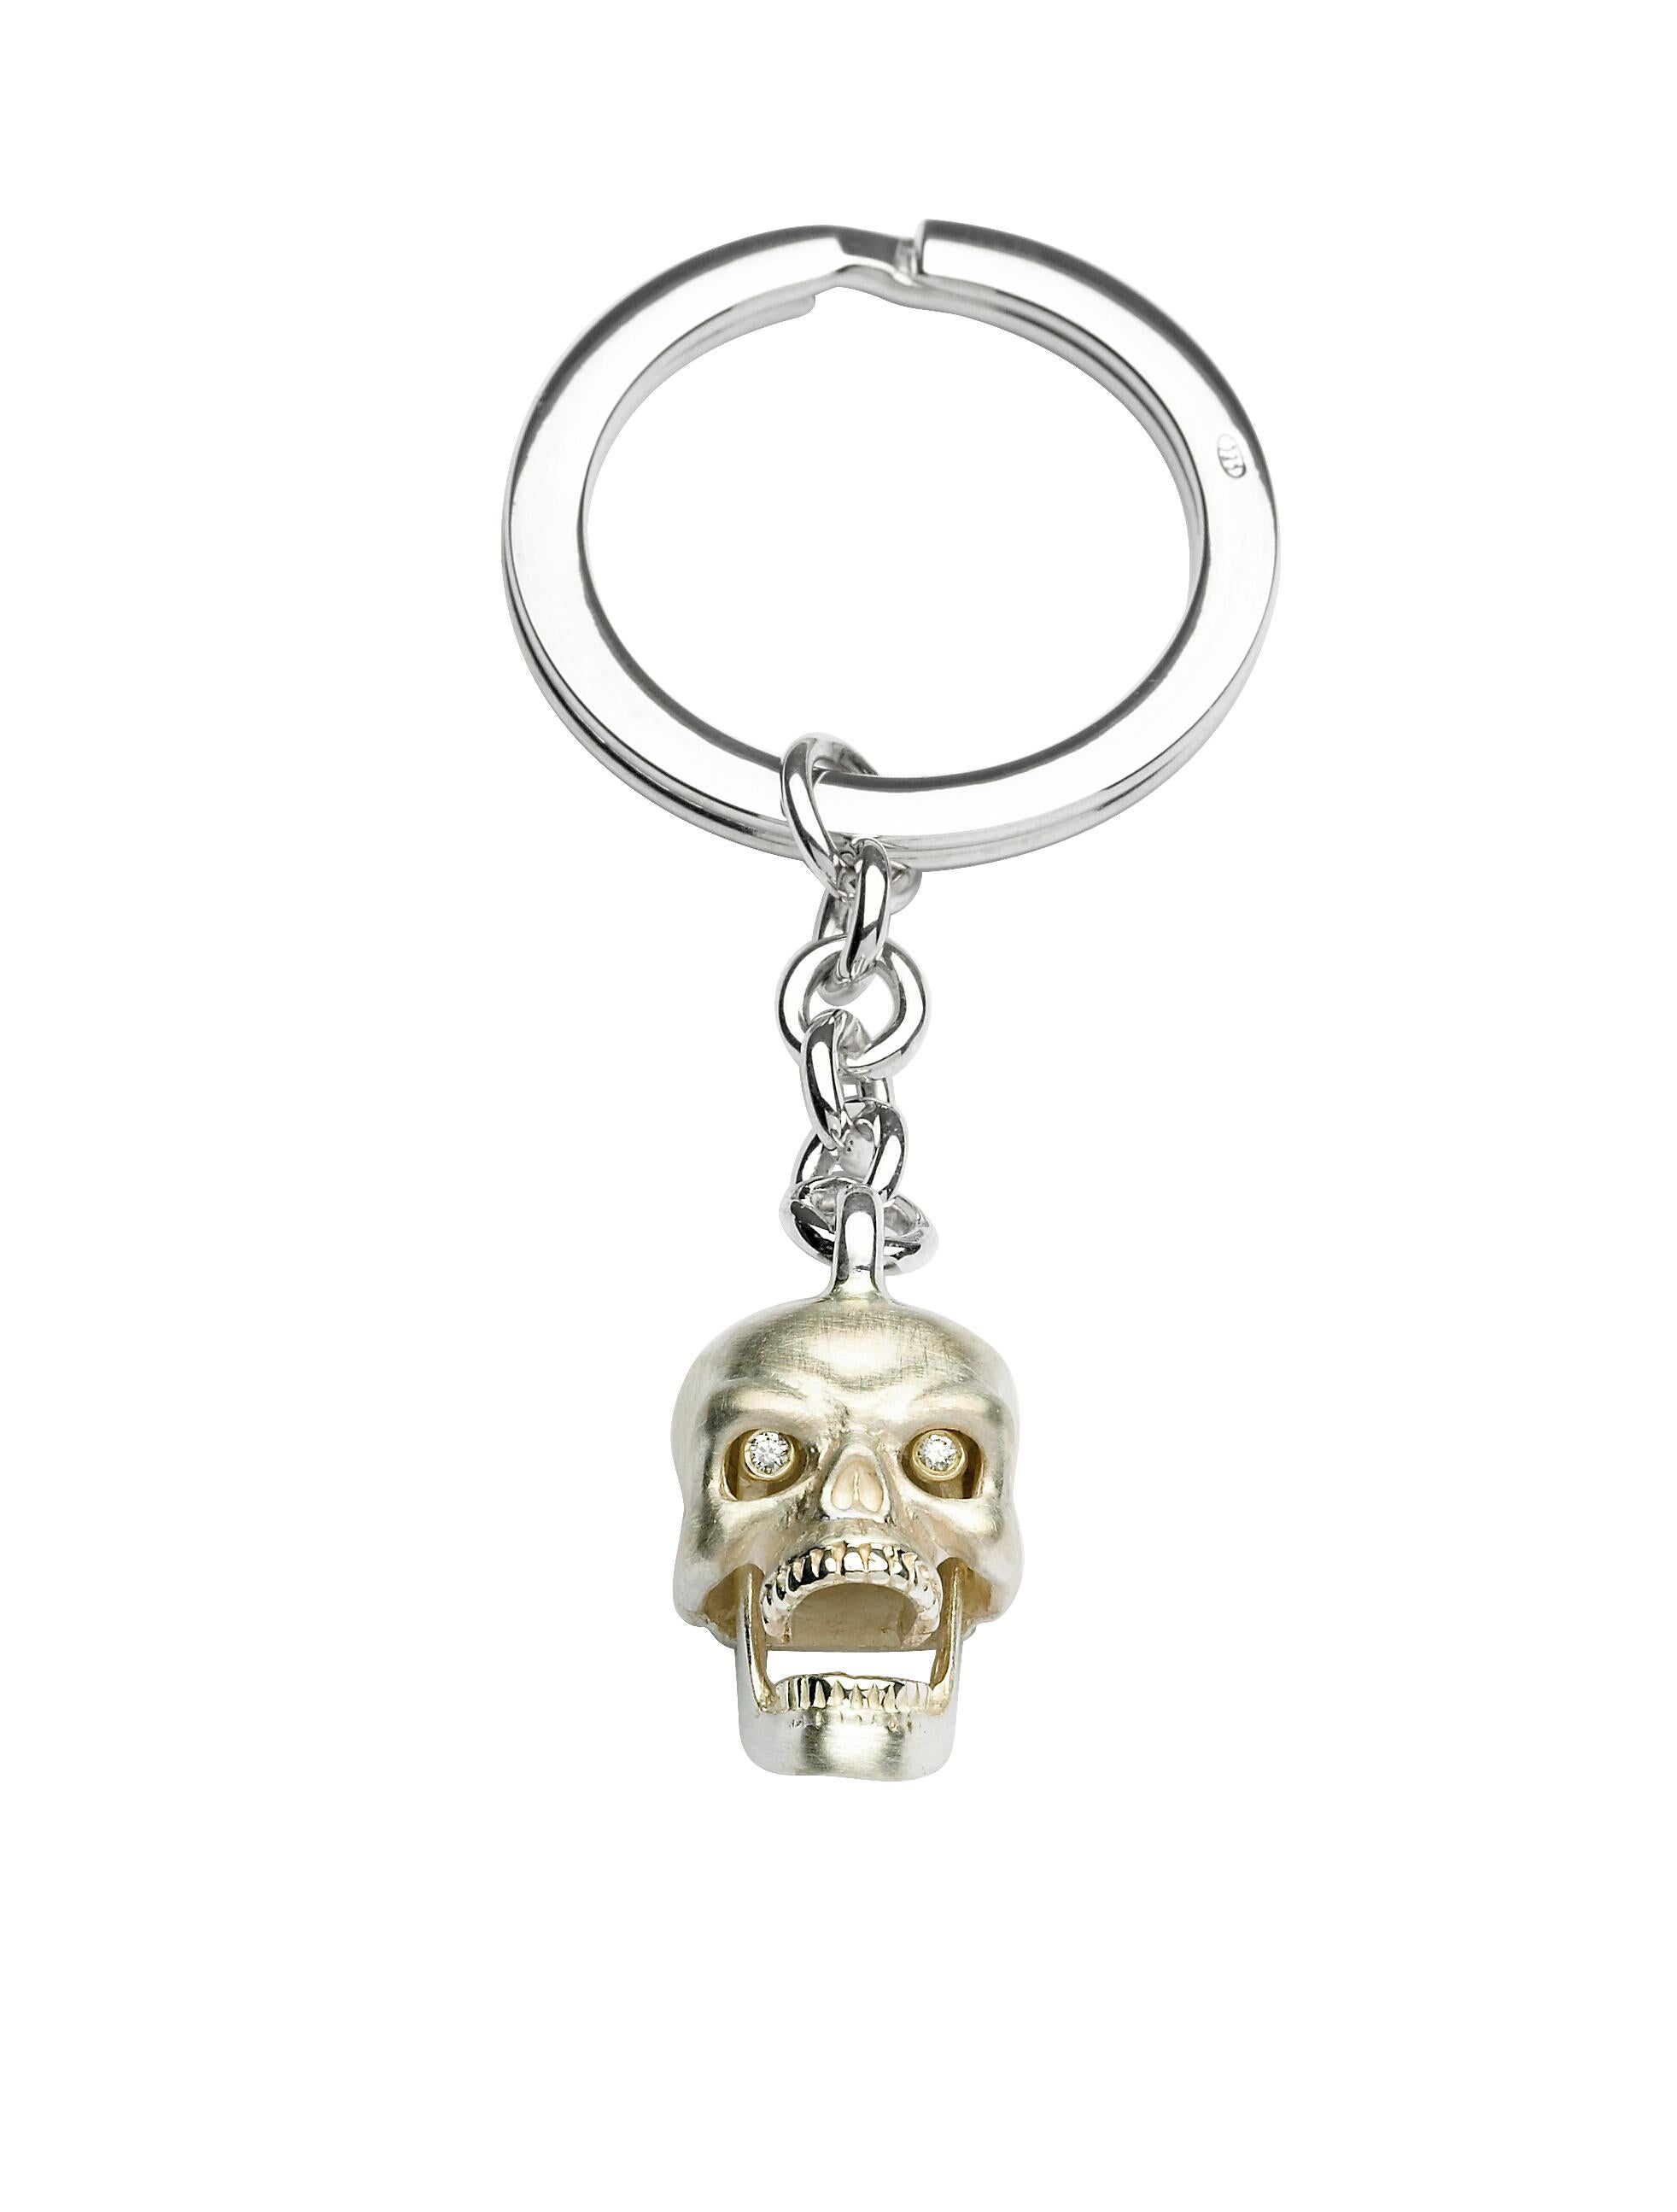 Whether you keep your keys in a handbag that could securely accommodate the contents of a small cupboard or if your keys reside in a pocket, our stunning, sterling silver skull keyring will easily be located.
And what's more, when you do find the